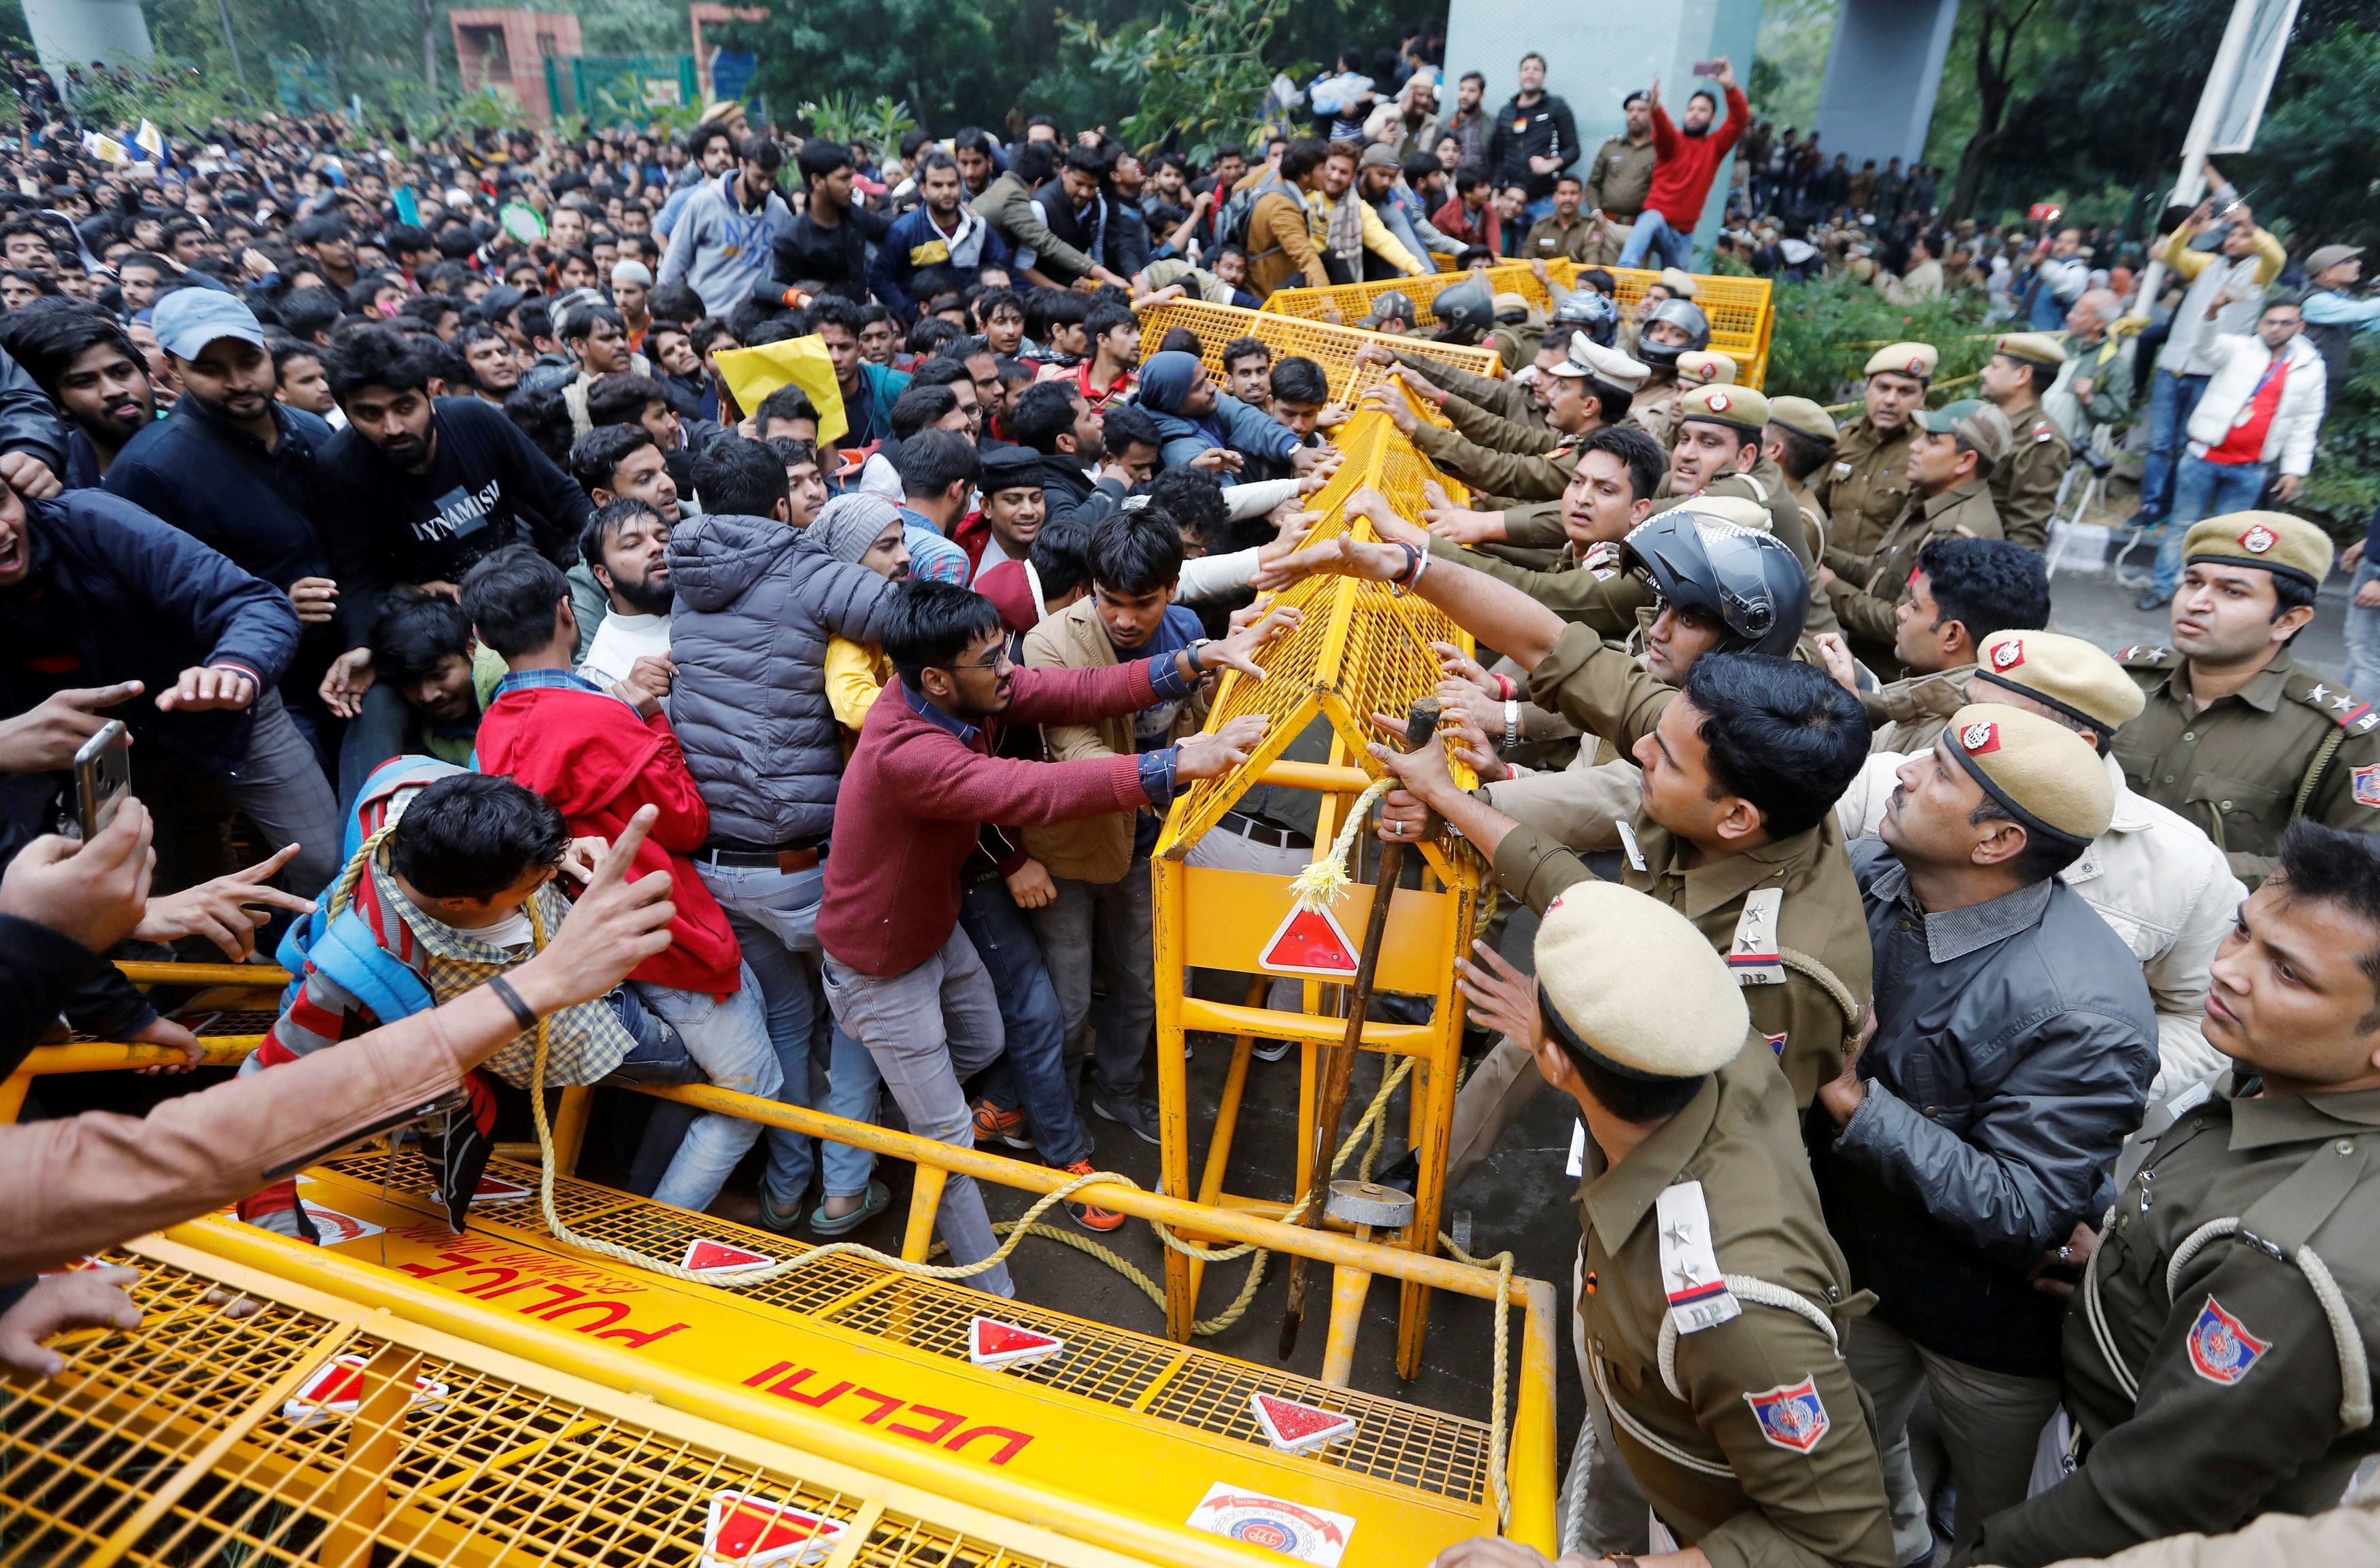 Police and protestors scuffle outside the Jamia Millia Islamia University during a protest against the Citizenship Amendment Bill, a bill that seeks to give citizenship to religious minorities persecuted in neighbouring Muslim countries, in New Delhi, India, December 13, 2019. Credit: REUTERS